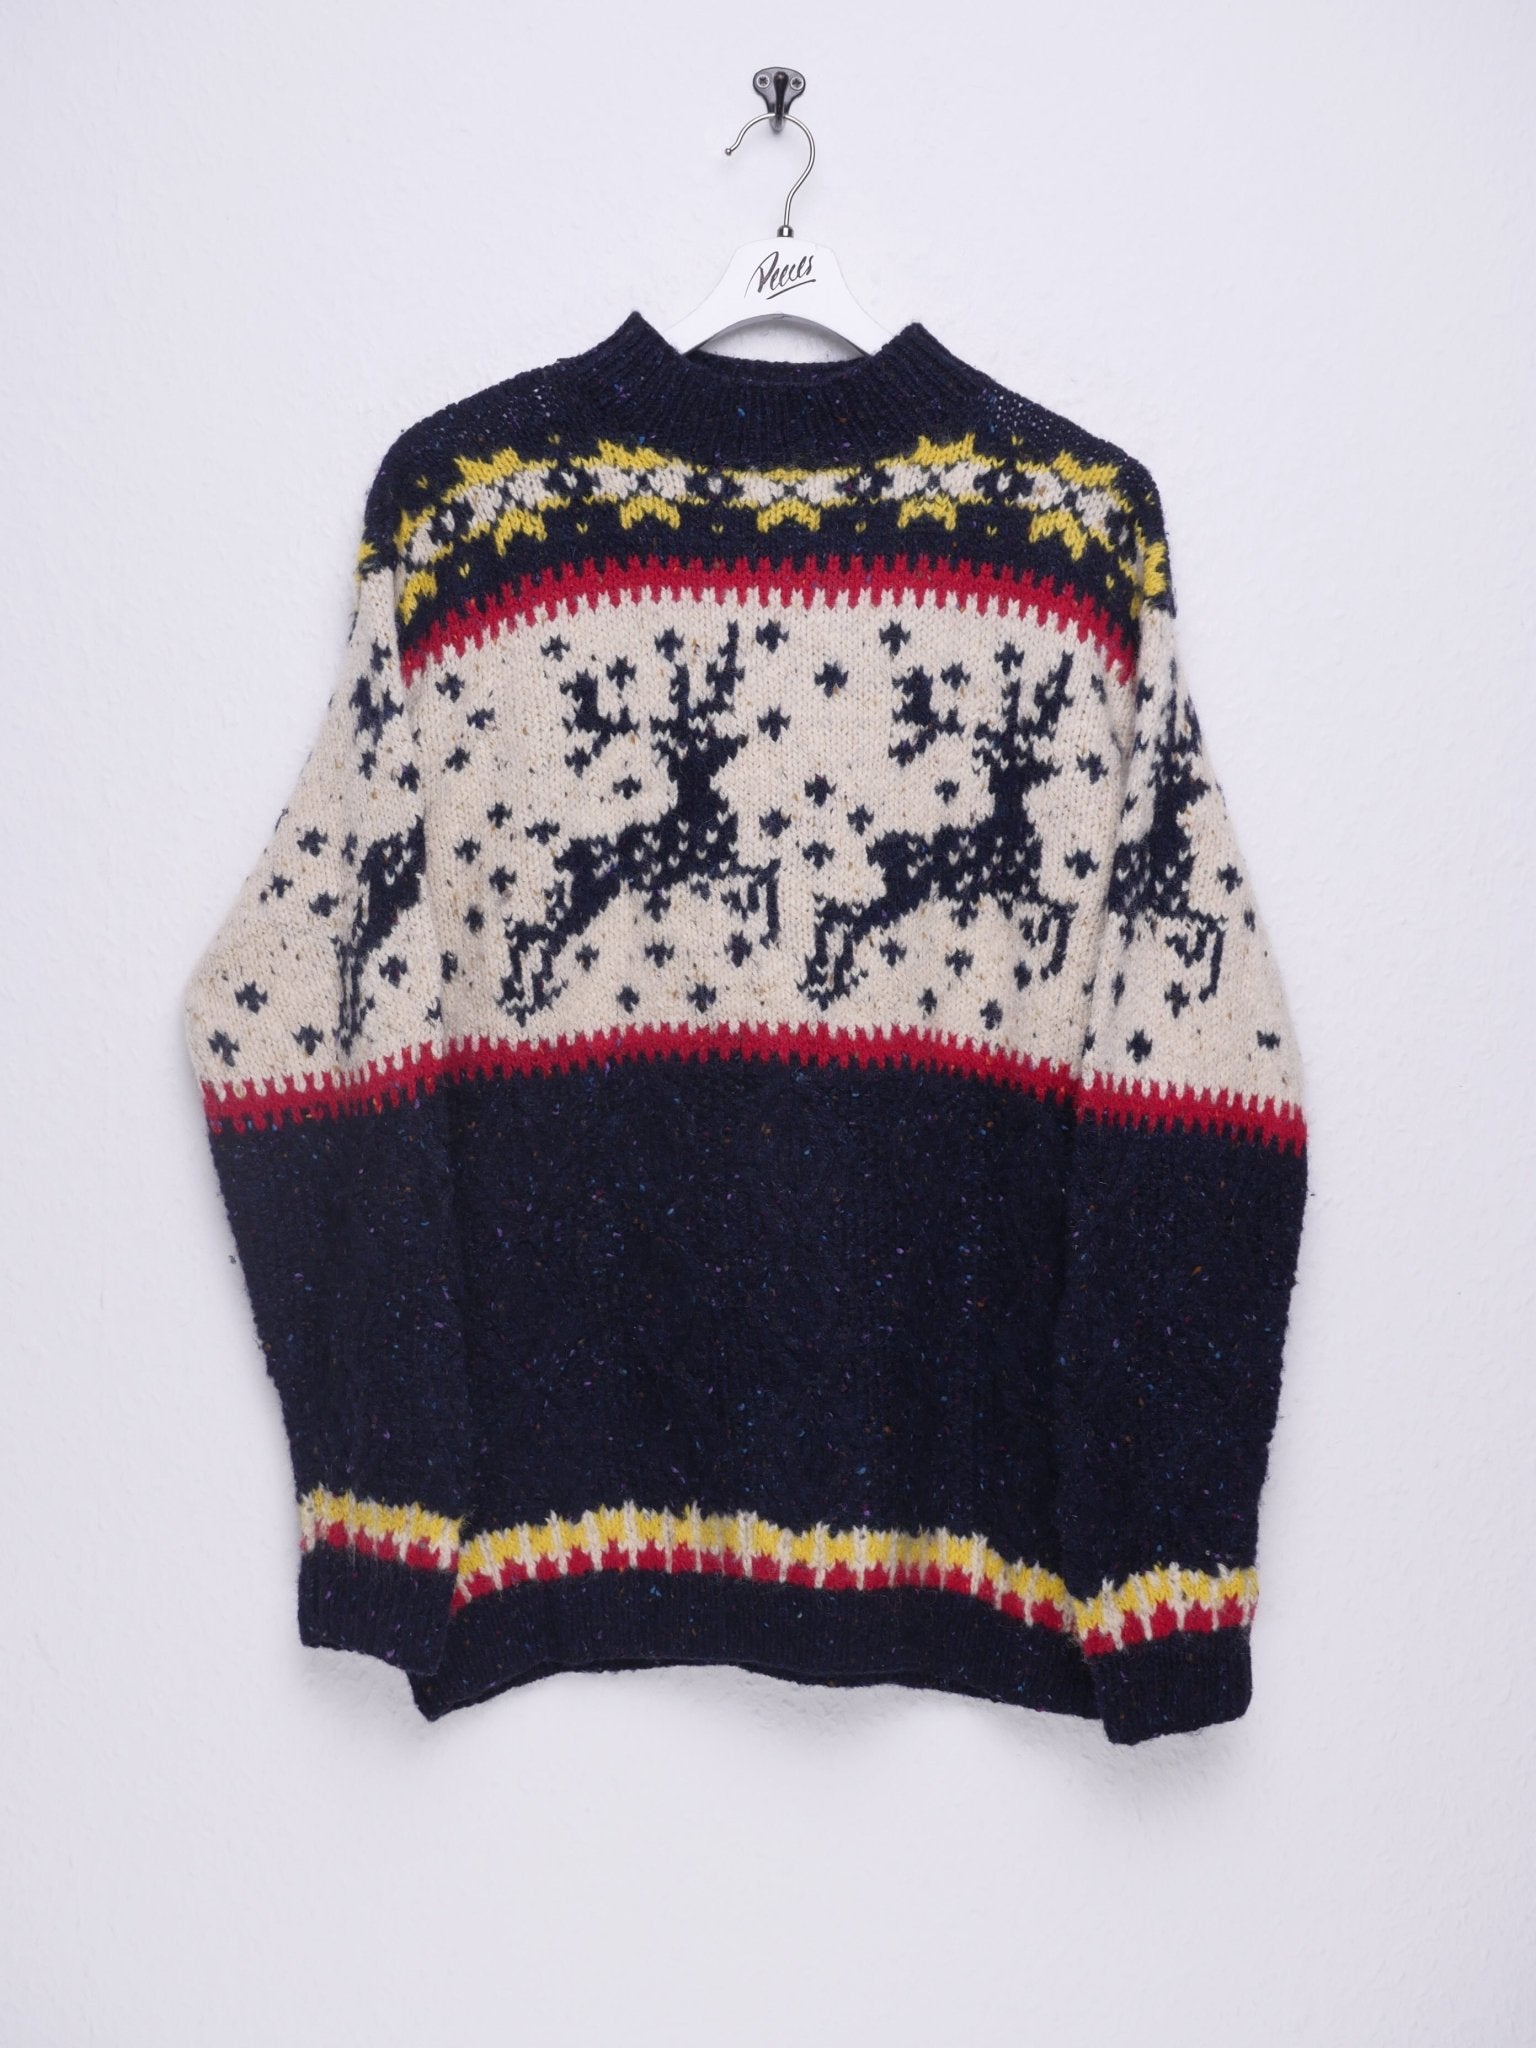 Reindeer knitted Sweater - Peeces